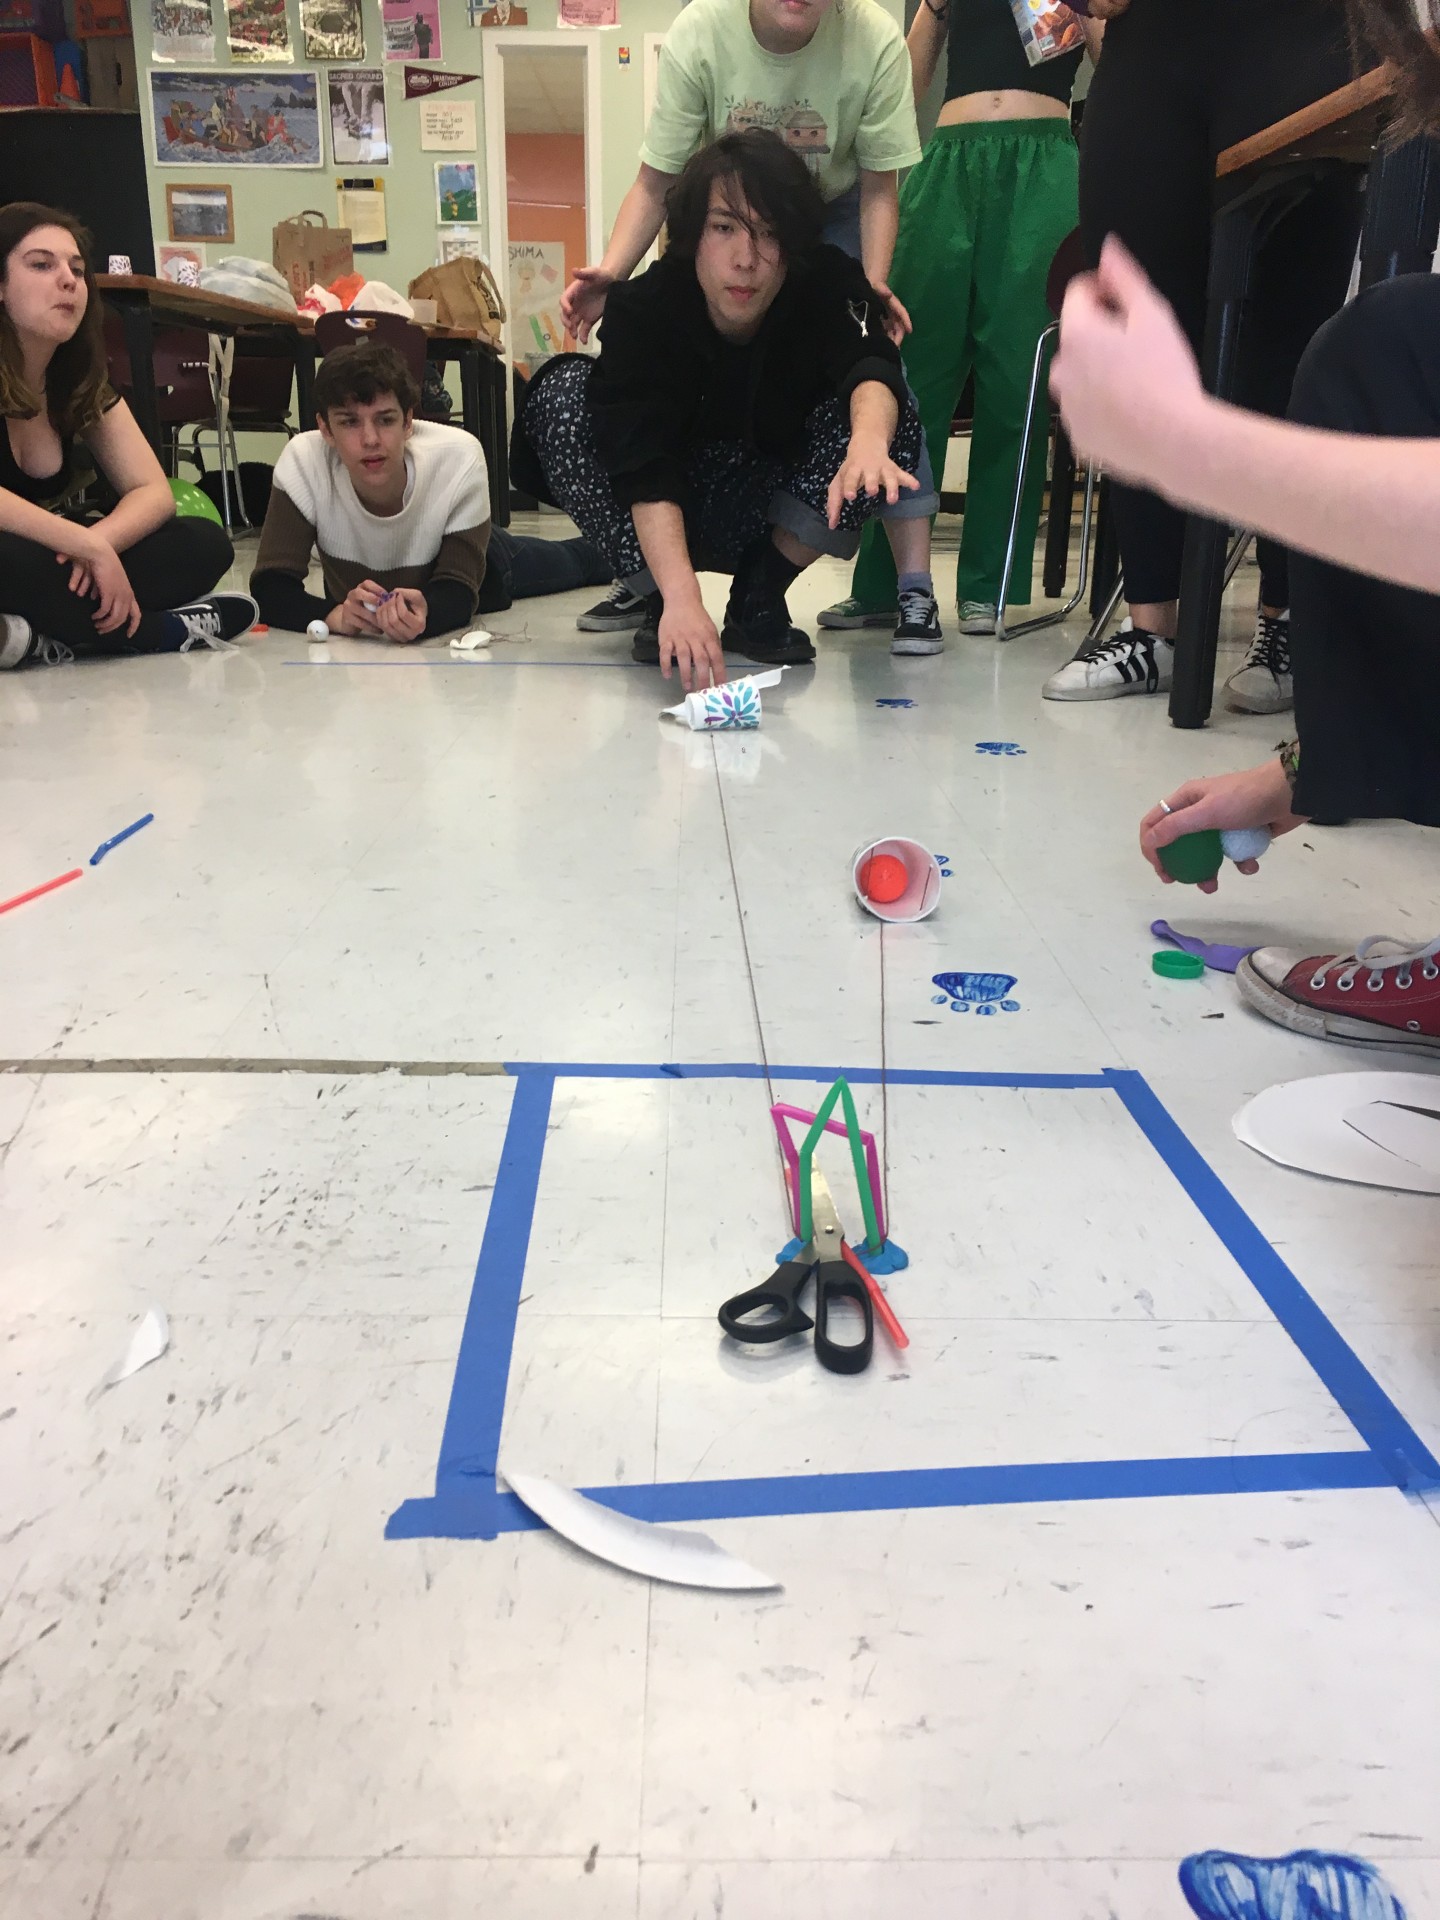 Team 1 performing their ball transporting system. They had to operate under a 6 minute time constraint and could not communicate verbally during their build time and had to stand behind the line to present their pulley solution.